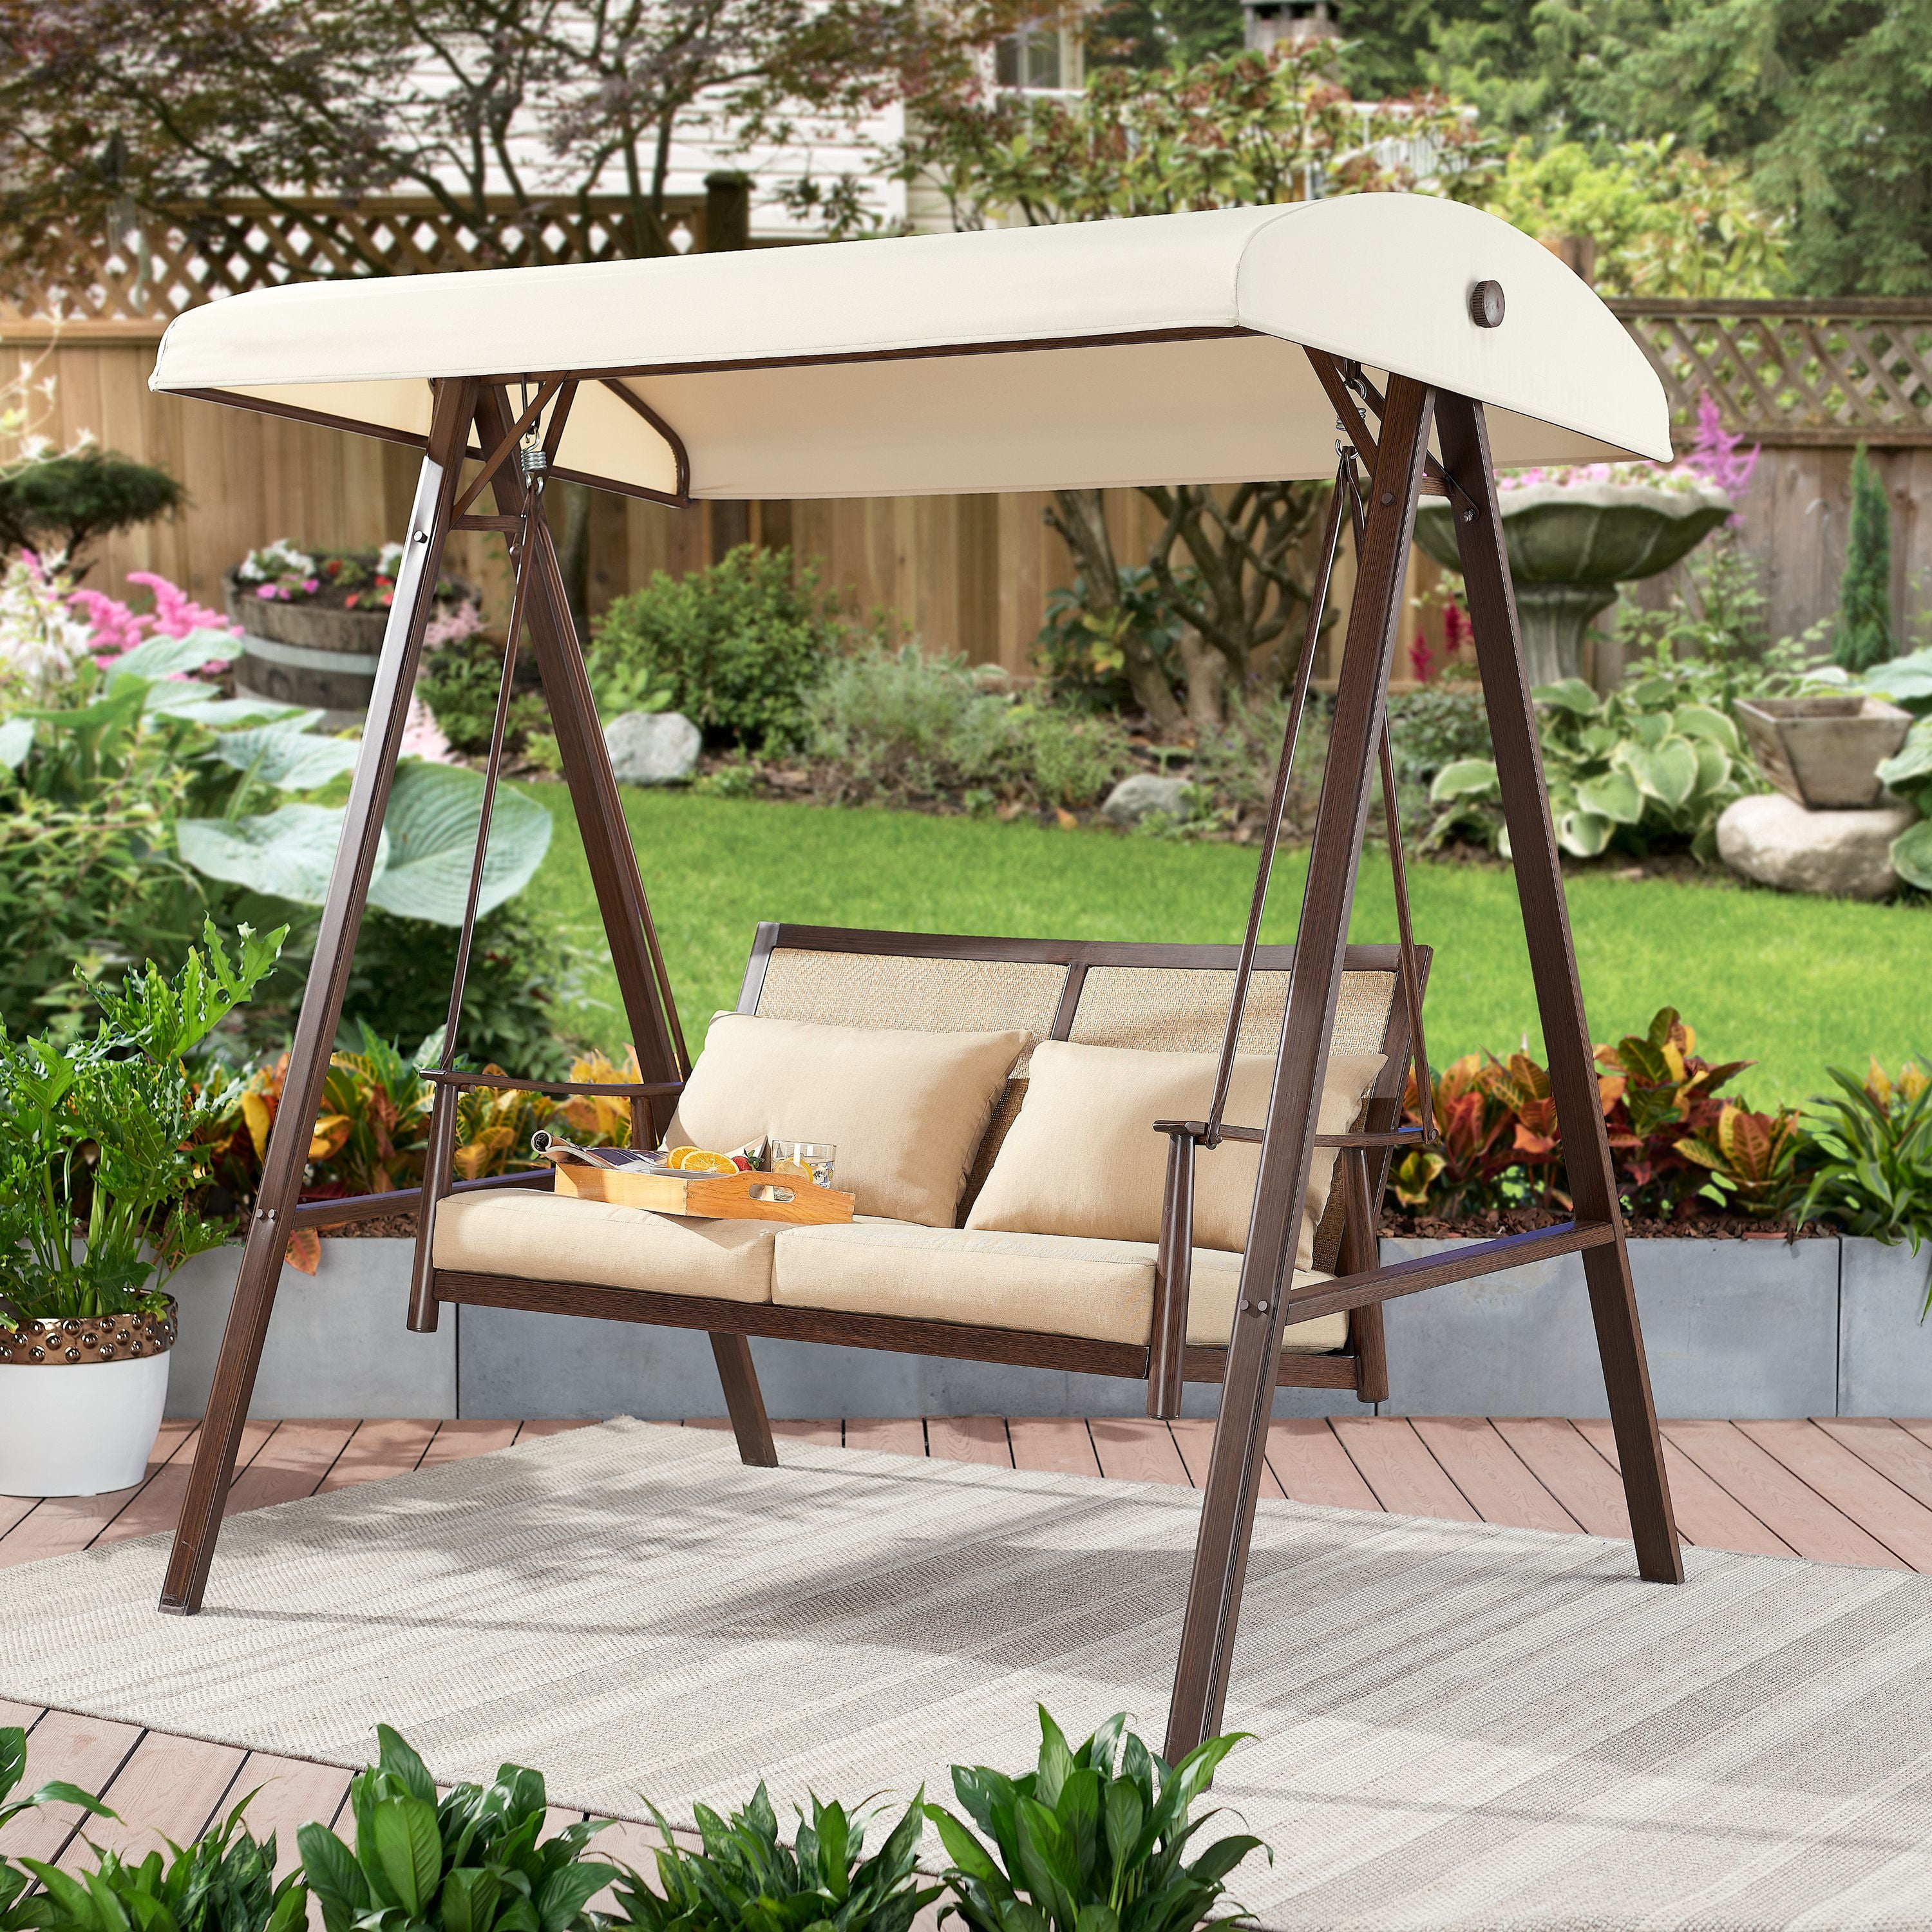 Comfortable Outdoor Swings For Relaxation